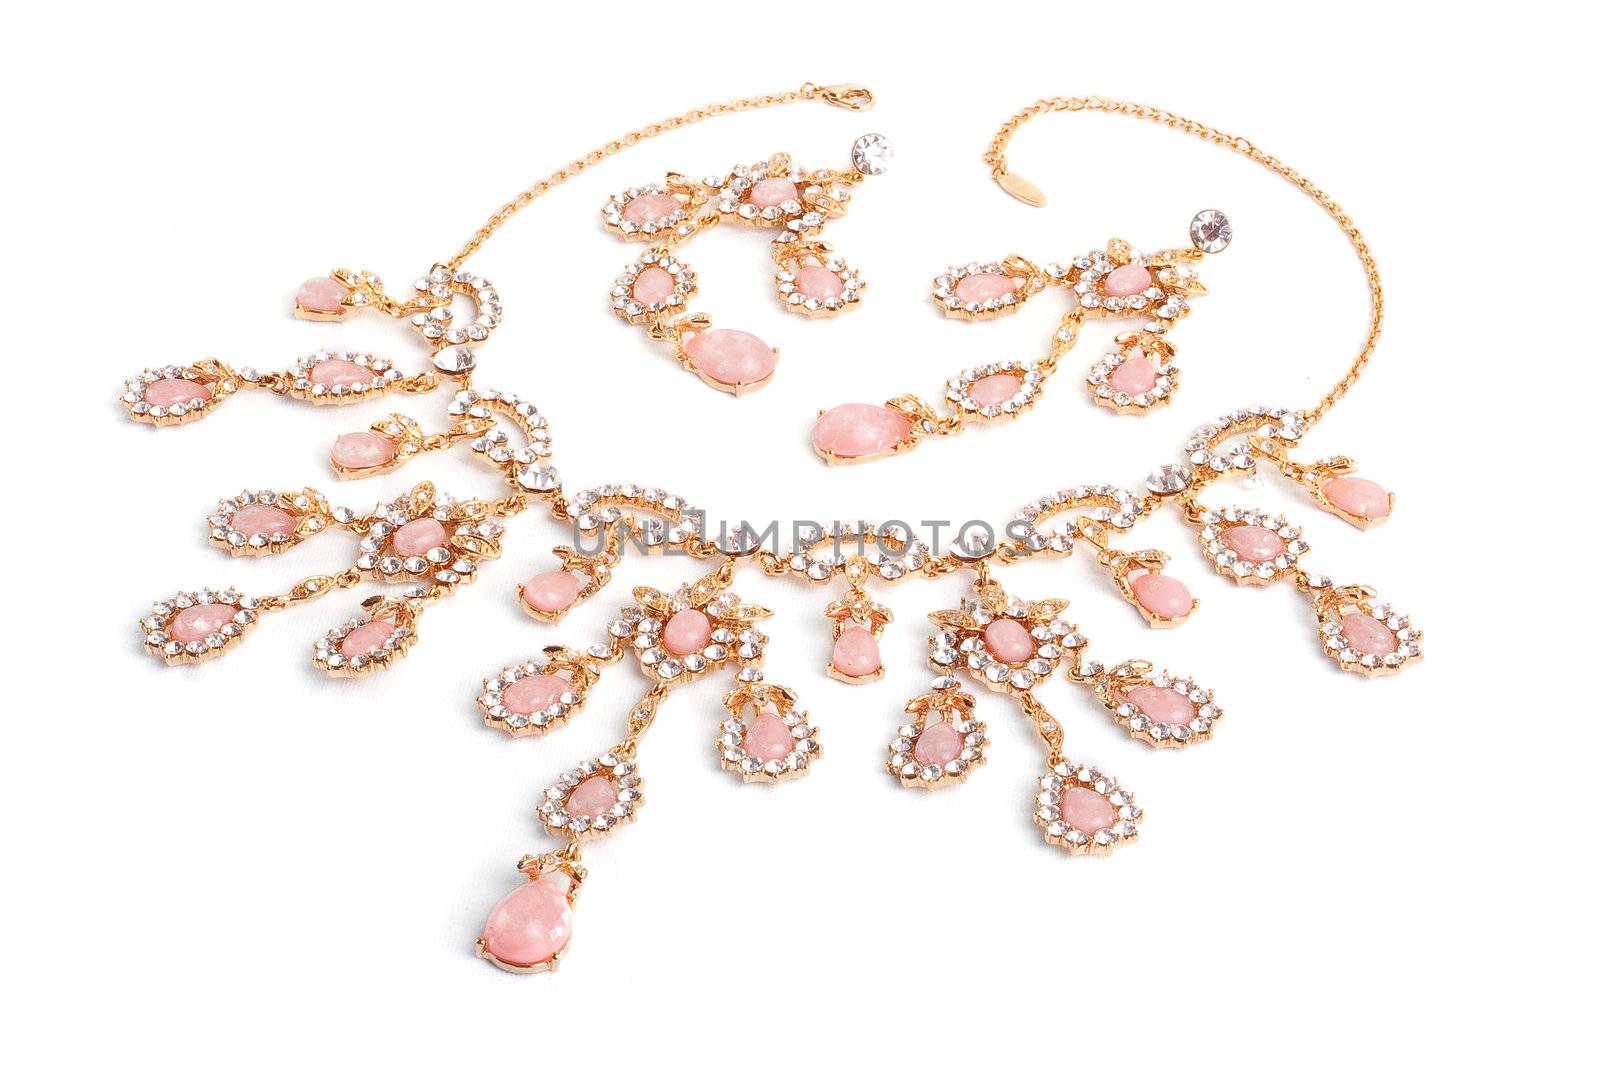 Diamond pendant with pink gems isolated on white